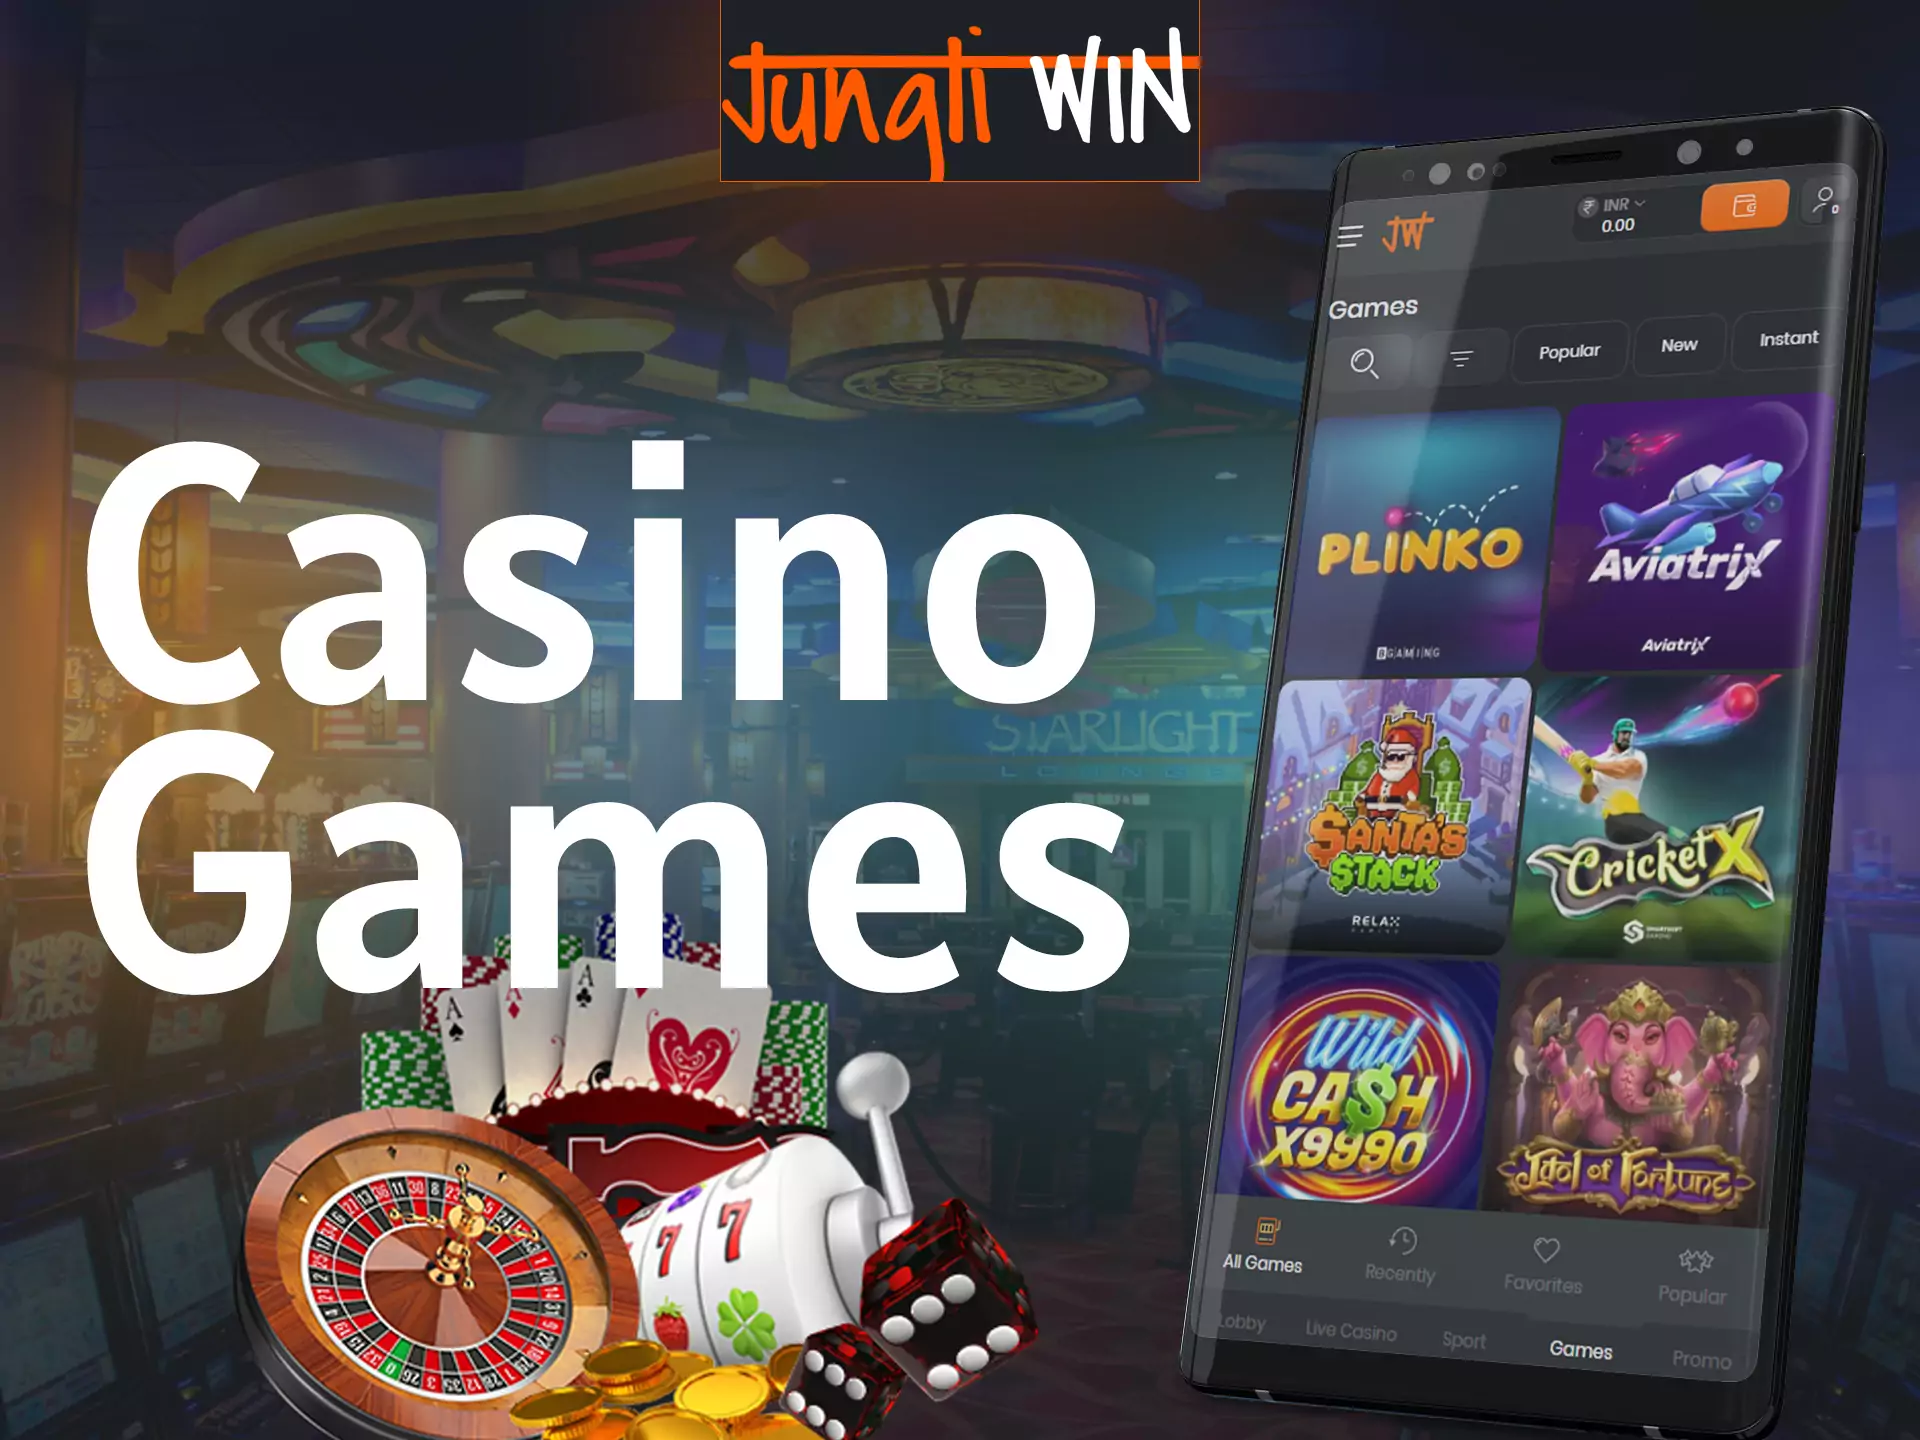 At Jungliwin Casino, you can try many different games and find the most interesting ones for yourself.